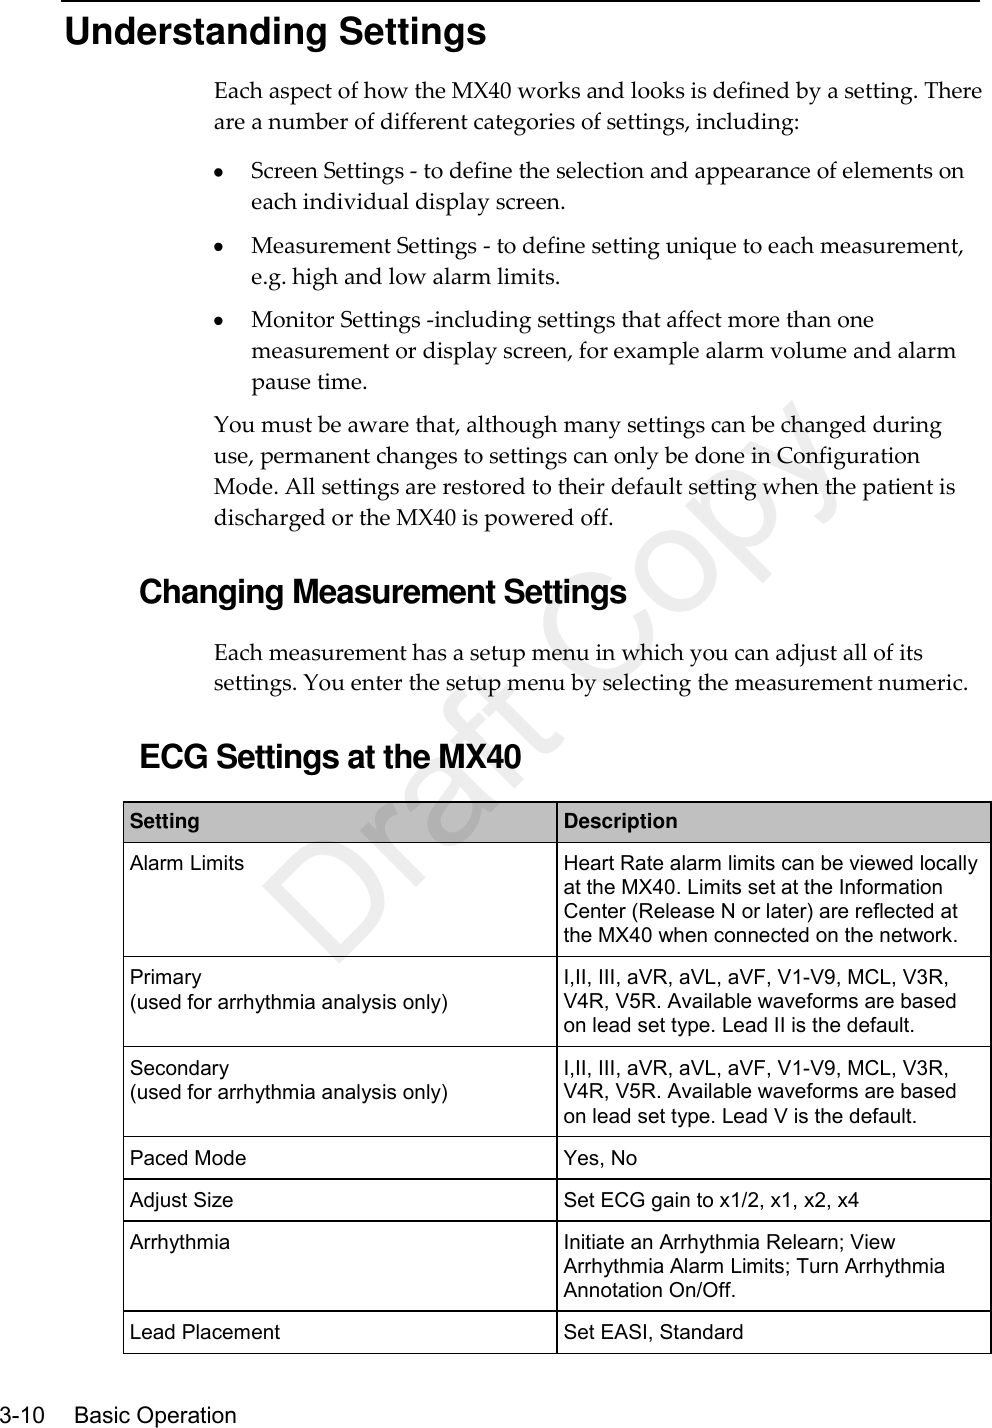    3-10    Basic Operation  Understanding Settings Each aspect of how the MX40 works and looks is defined by a setting. There are a number of different categories of settings, including:  Screen Settings - to define the selection and appearance of elements on each individual display screen.  Measurement Settings - to define setting unique to each measurement, e.g. high and low alarm limits.  Monitor Settings -including settings that affect more than one measurement or display screen, for example alarm volume and alarm pause time. You must be aware that, although many settings can be changed during use, permanent changes to settings can only be done in Configuration Mode. All settings are restored to their default setting when the patient is discharged or the MX40 is powered off.  Changing Measurement Settings Each measurement has a setup menu in which you can adjust all of its settings. You enter the setup menu by selecting the measurement numeric.  ECG Settings at the MX40 Setting Description Alarm Limits Heart Rate alarm limits can be viewed locally at the MX40. Limits set at the Information Center (Release N or later) are reflected at the MX40 when connected on the network. Primary (used for arrhythmia analysis only) I,II, III, aVR, aVL, aVF, V1-V9, MCL, V3R, V4R, V5R. Available waveforms are based on lead set type. Lead II is the default. Secondary (used for arrhythmia analysis only) I,II, III, aVR, aVL, aVF, V1-V9, MCL, V3R, V4R, V5R. Available waveforms are based on lead set type. Lead V is the default. Paced Mode Yes, No Adjust Size Set ECG gain to x1/2, x1, x2, x4 Arrhythmia Initiate an Arrhythmia Relearn; View Arrhythmia Alarm Limits; Turn Arrhythmia Annotation On/Off. Lead Placement Set EASI, Standard Draft Copy